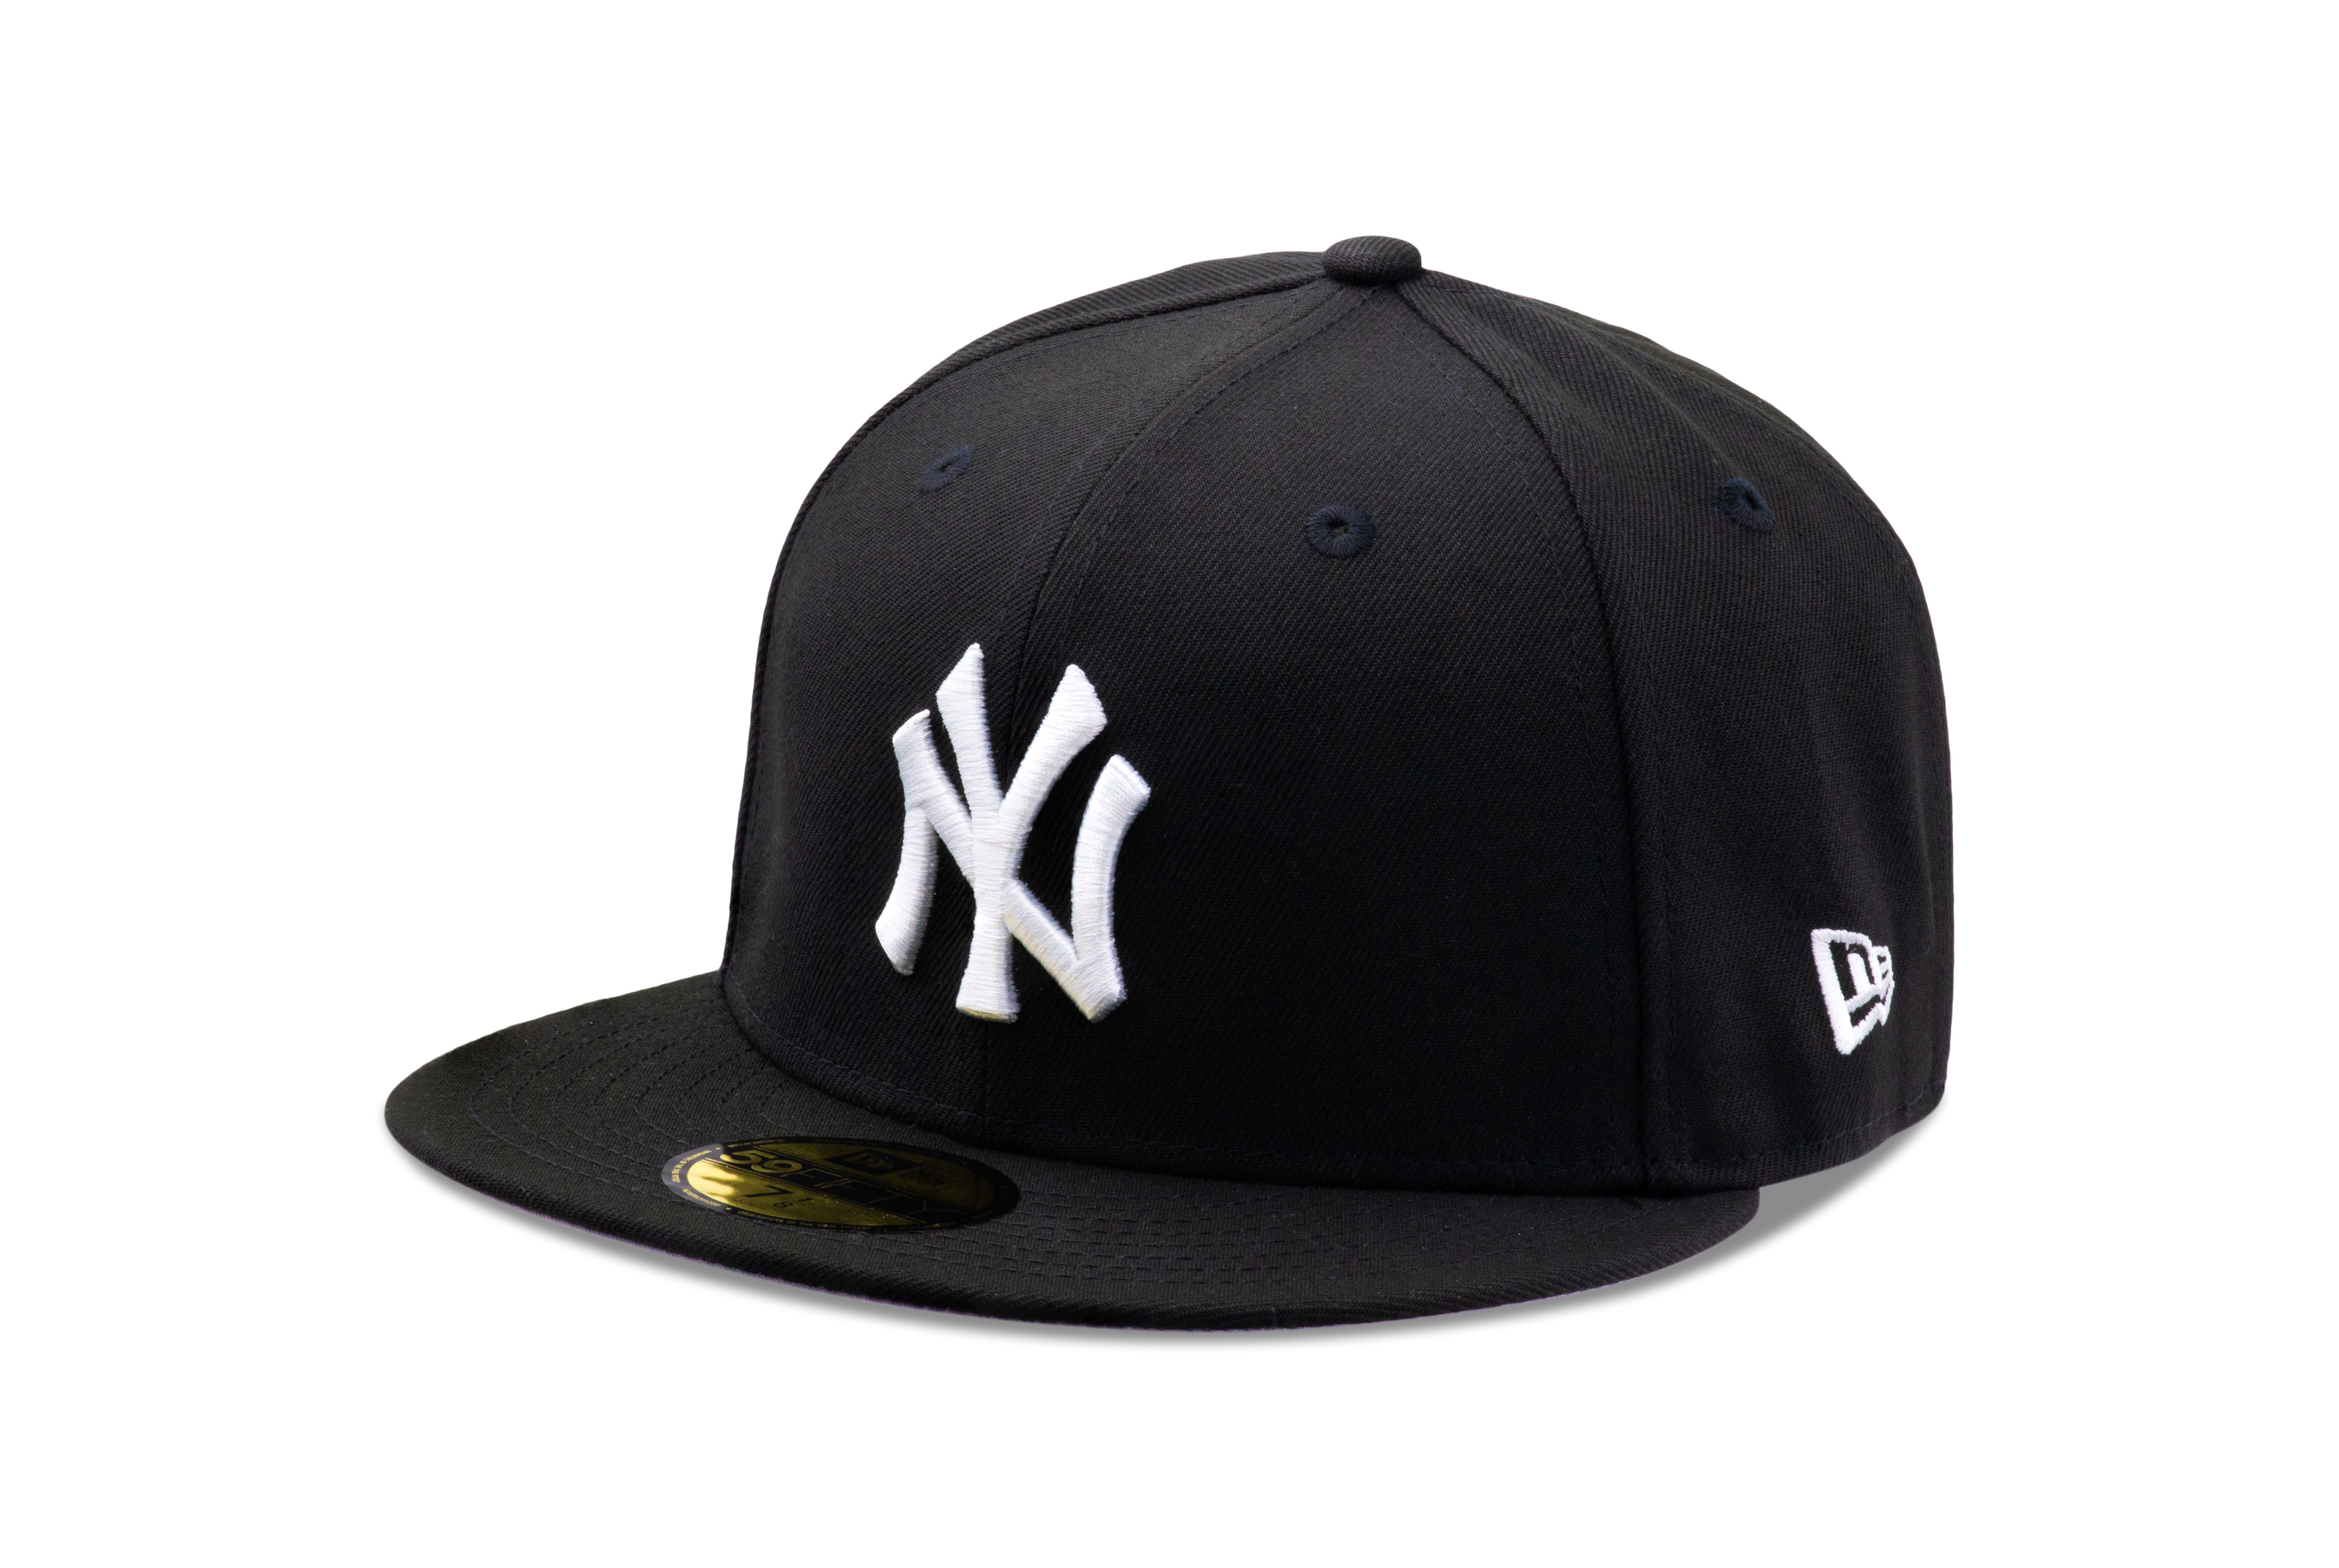 New Era New York Yankees Basic 59Fifty Fitted Cap Hat Black/White 11591127 (Size 7 1/8)